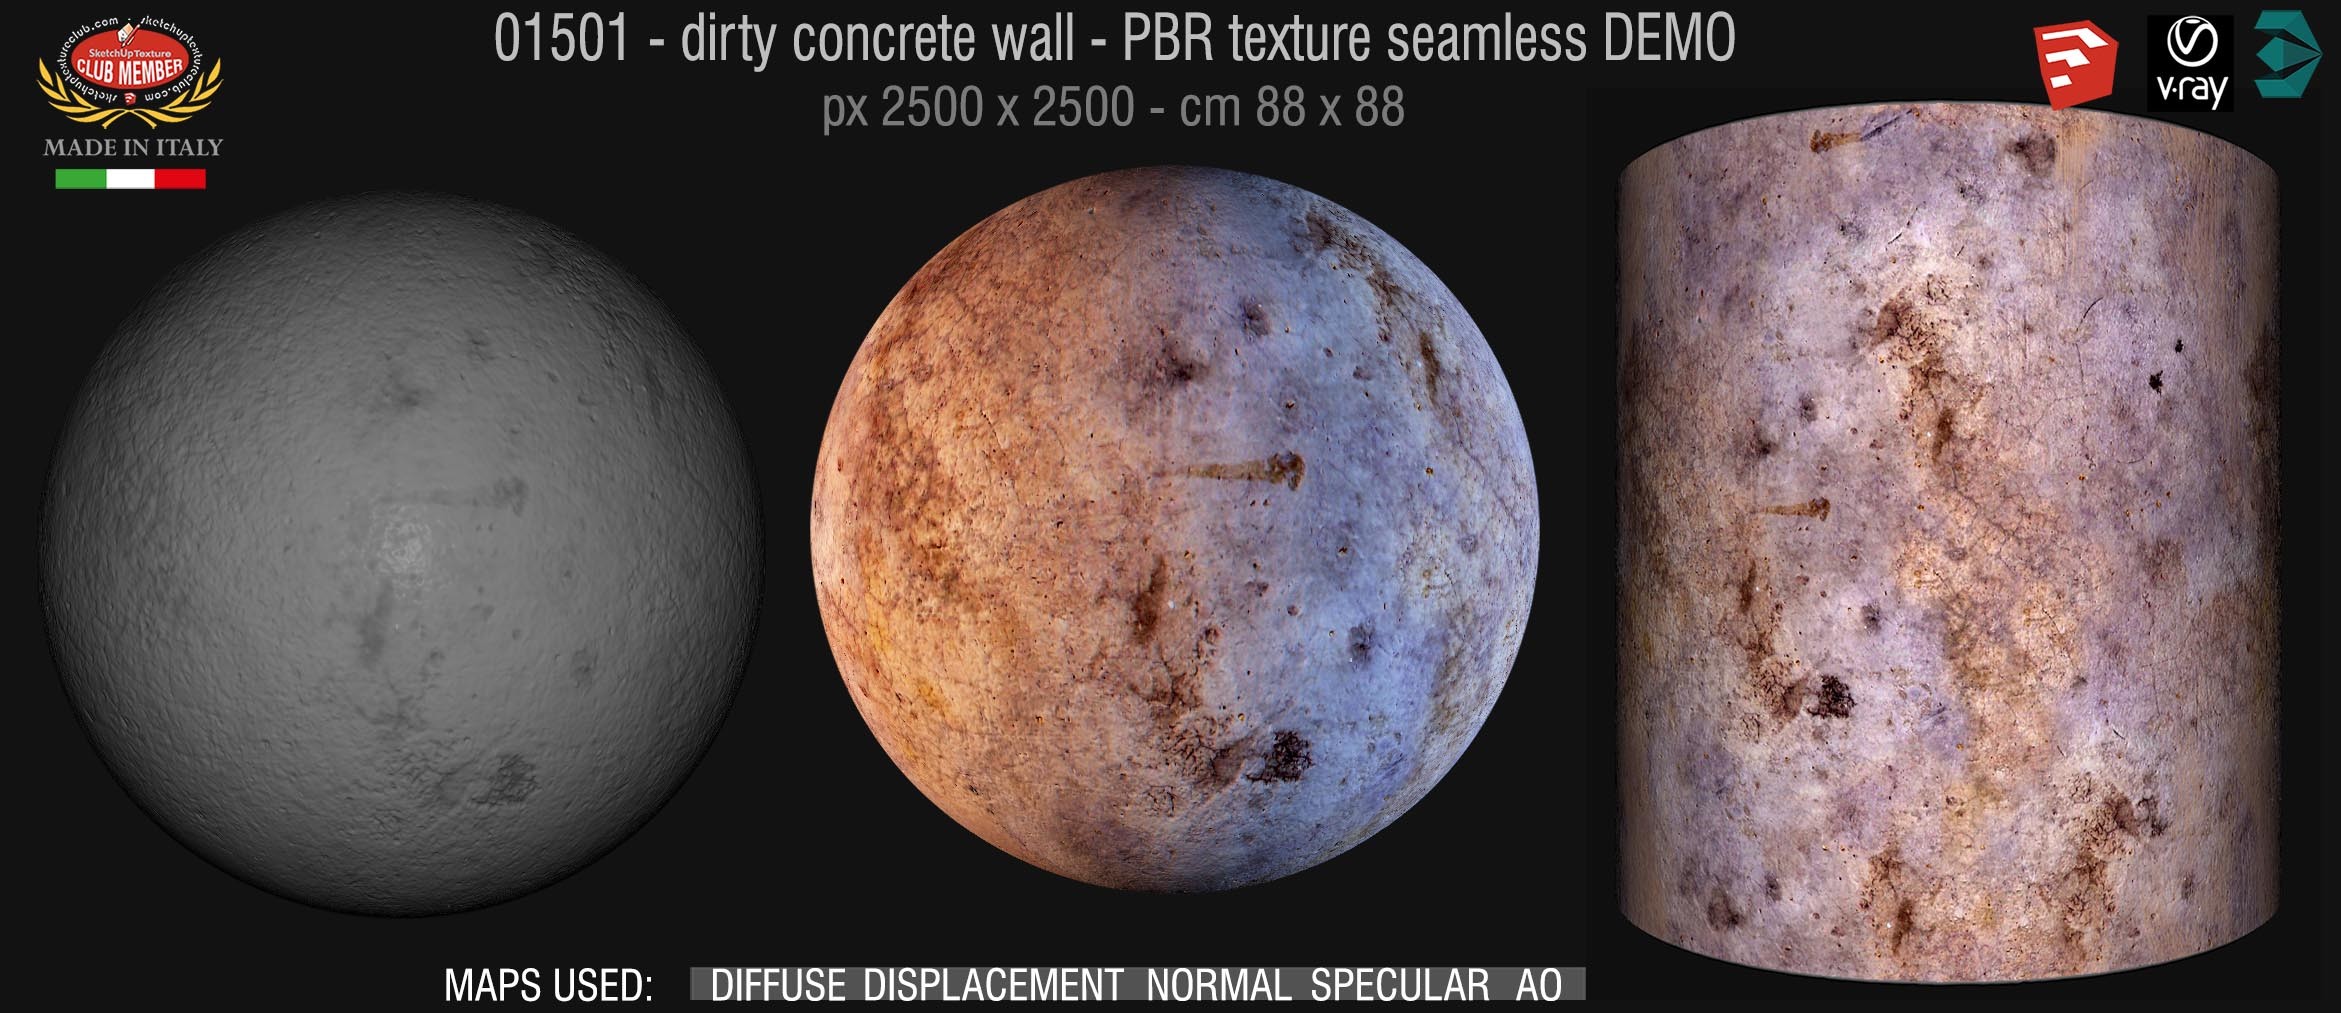 01501 Concrete bare dirty wall PBR texture seamless DEMO